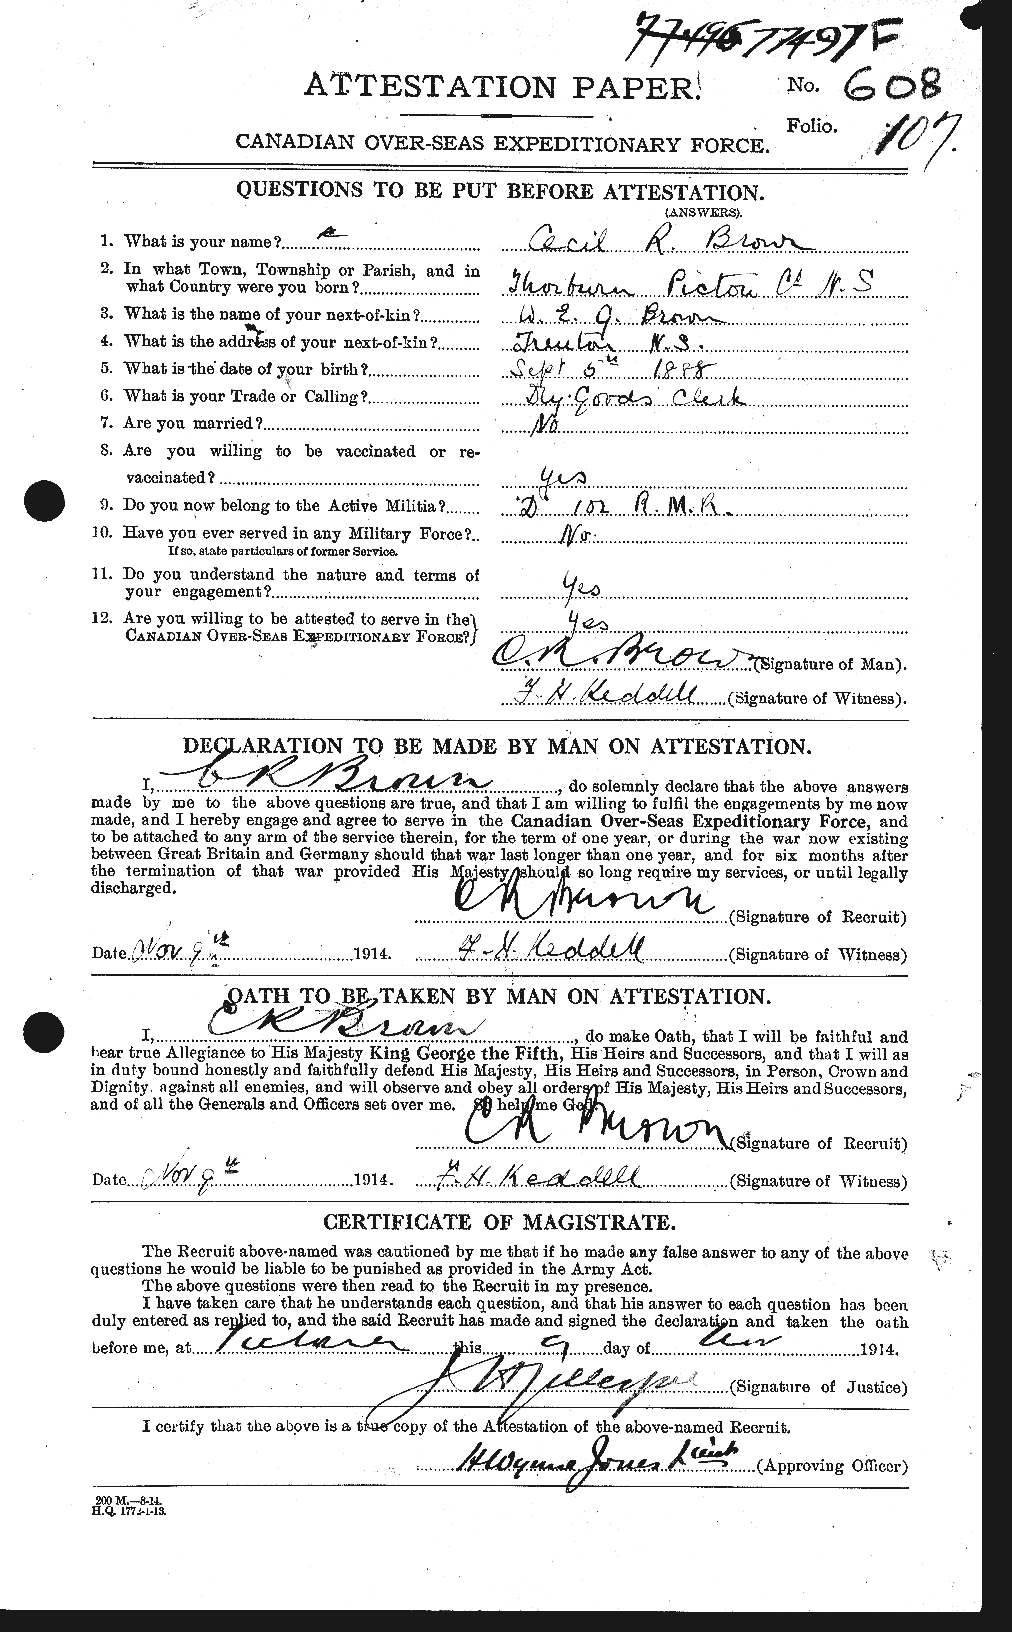 Personnel Records of the First World War - CEF 264327a